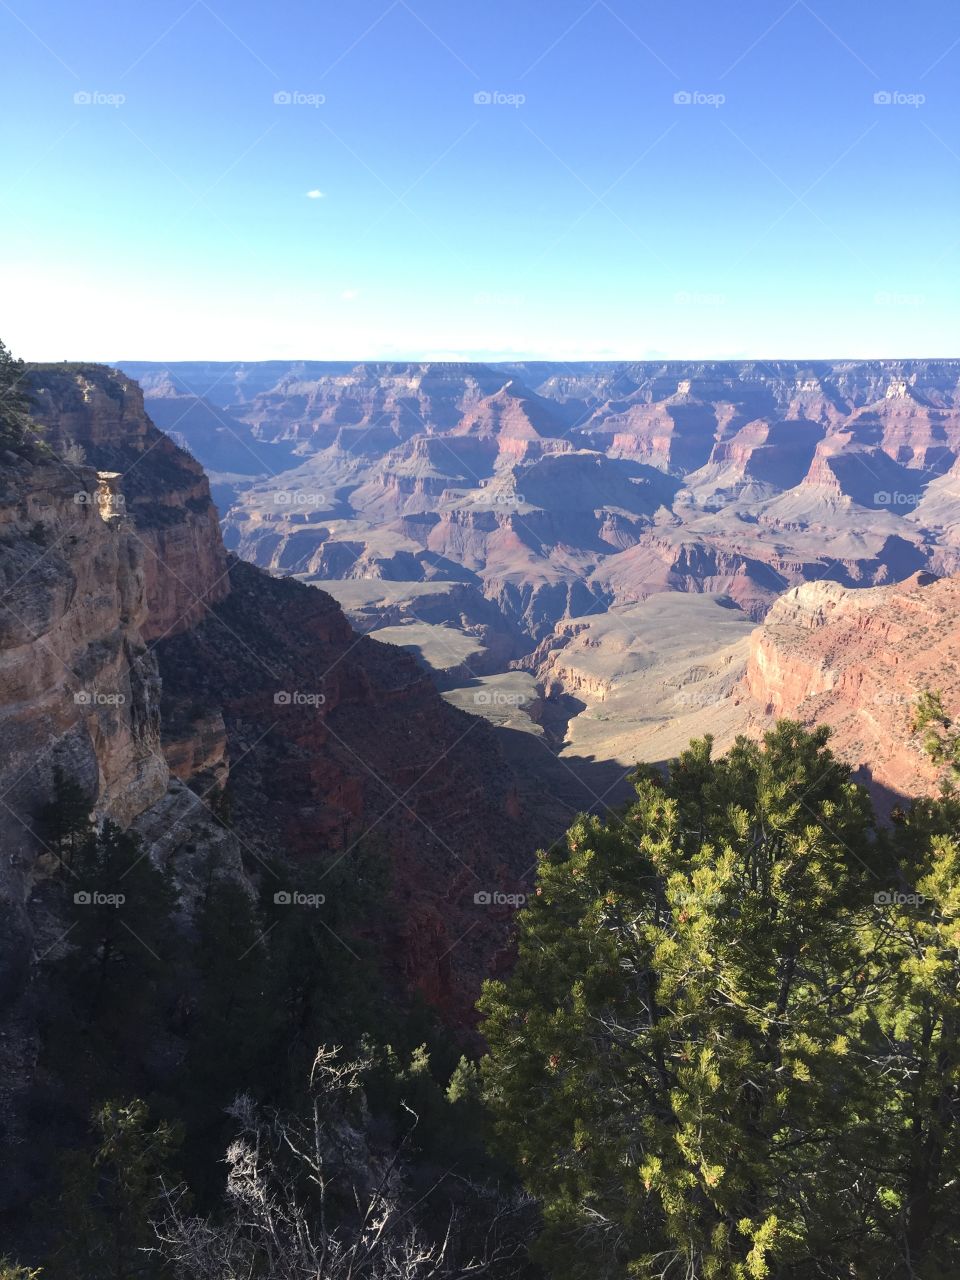 Sunny day at the Grand Canyon. 